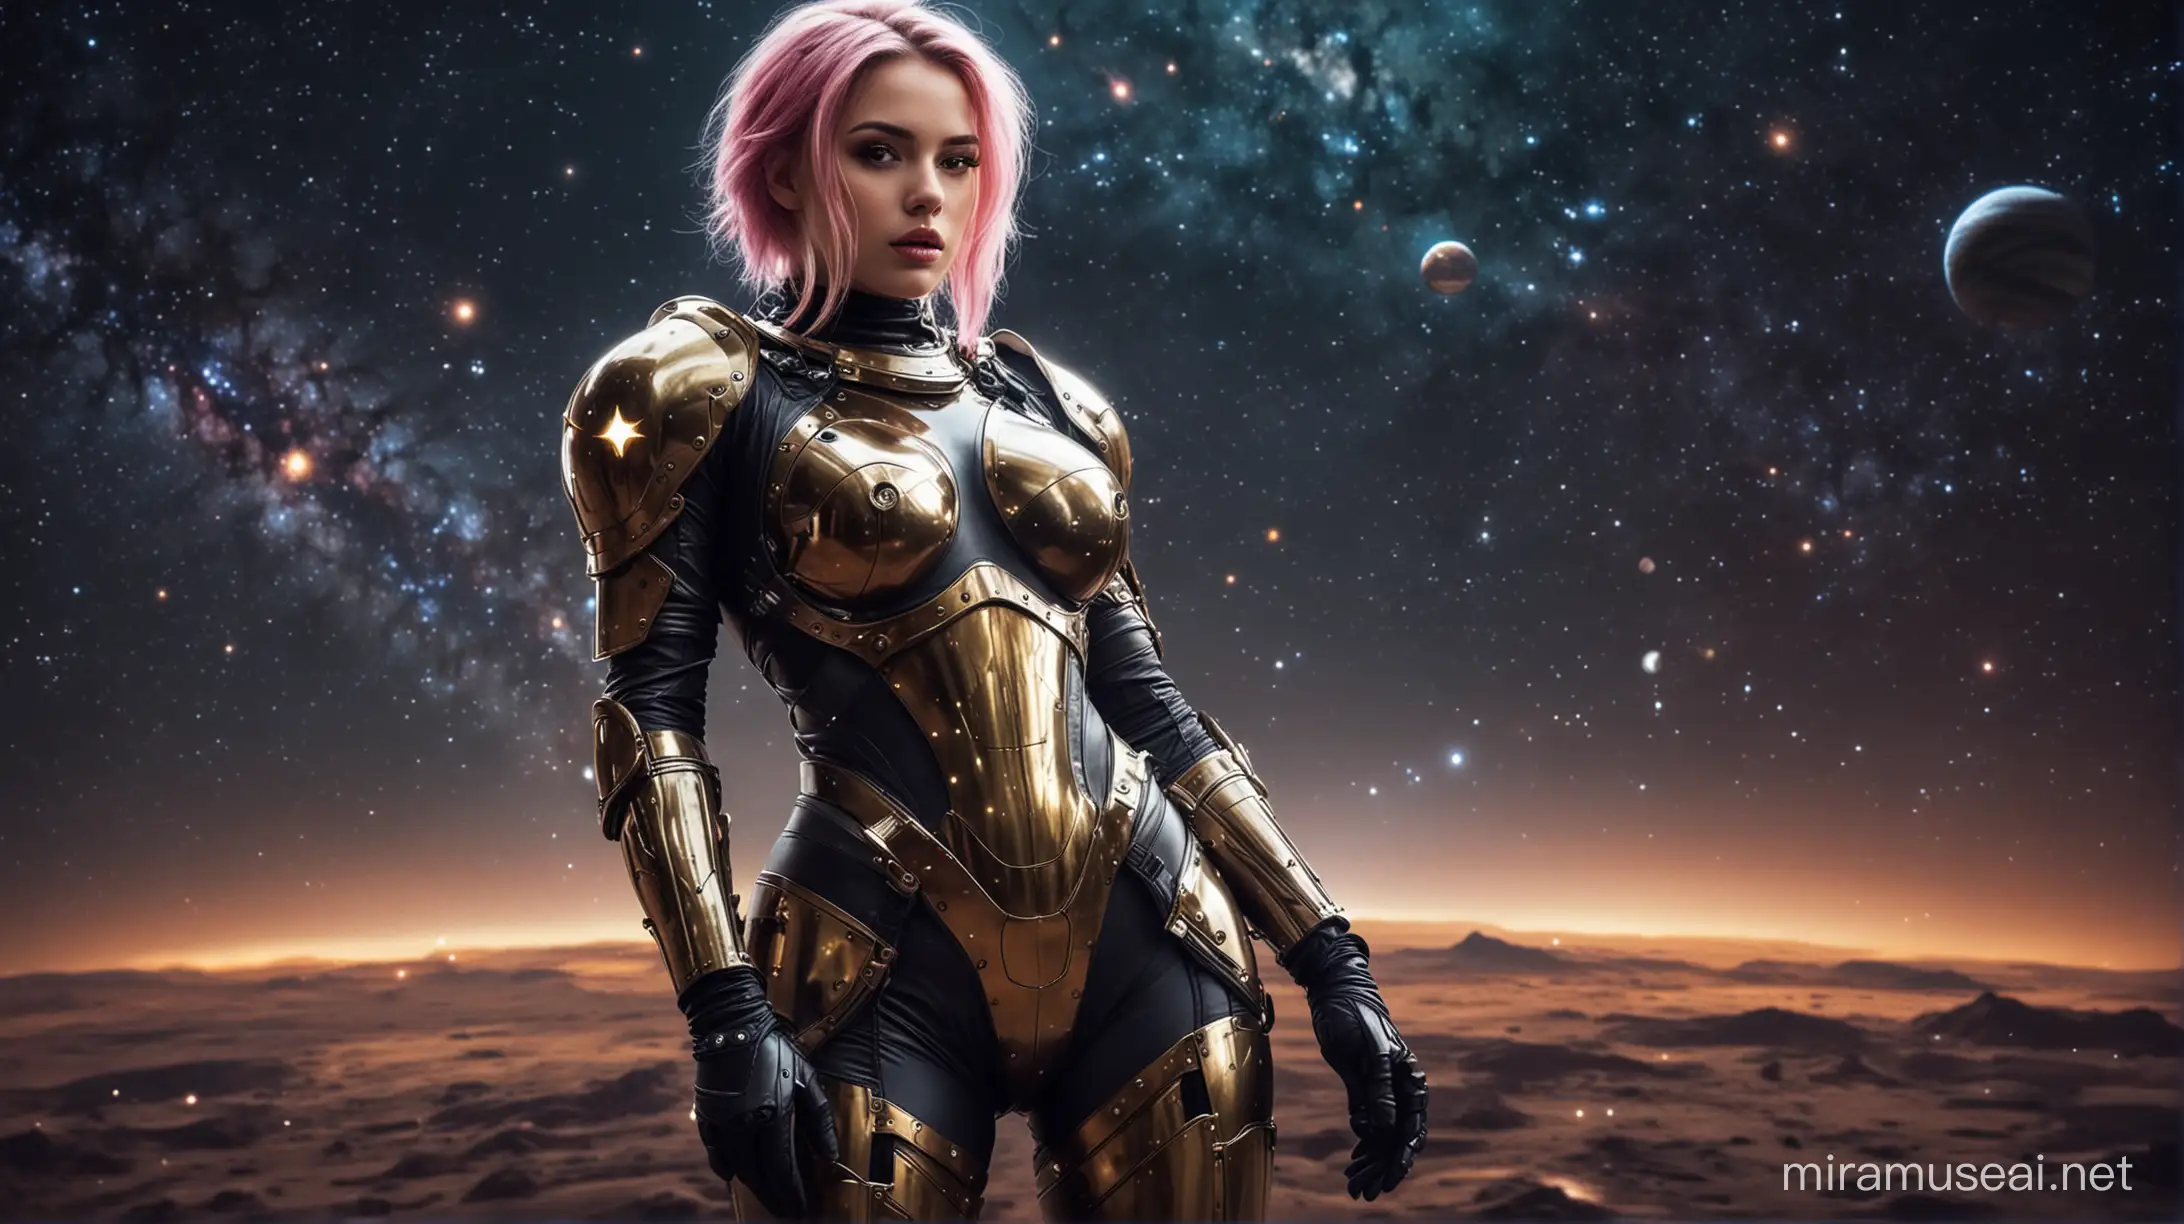 Sexy Knight Girl in Black and Gold Armored Spacesuit Amidst Glowing Space and Stars